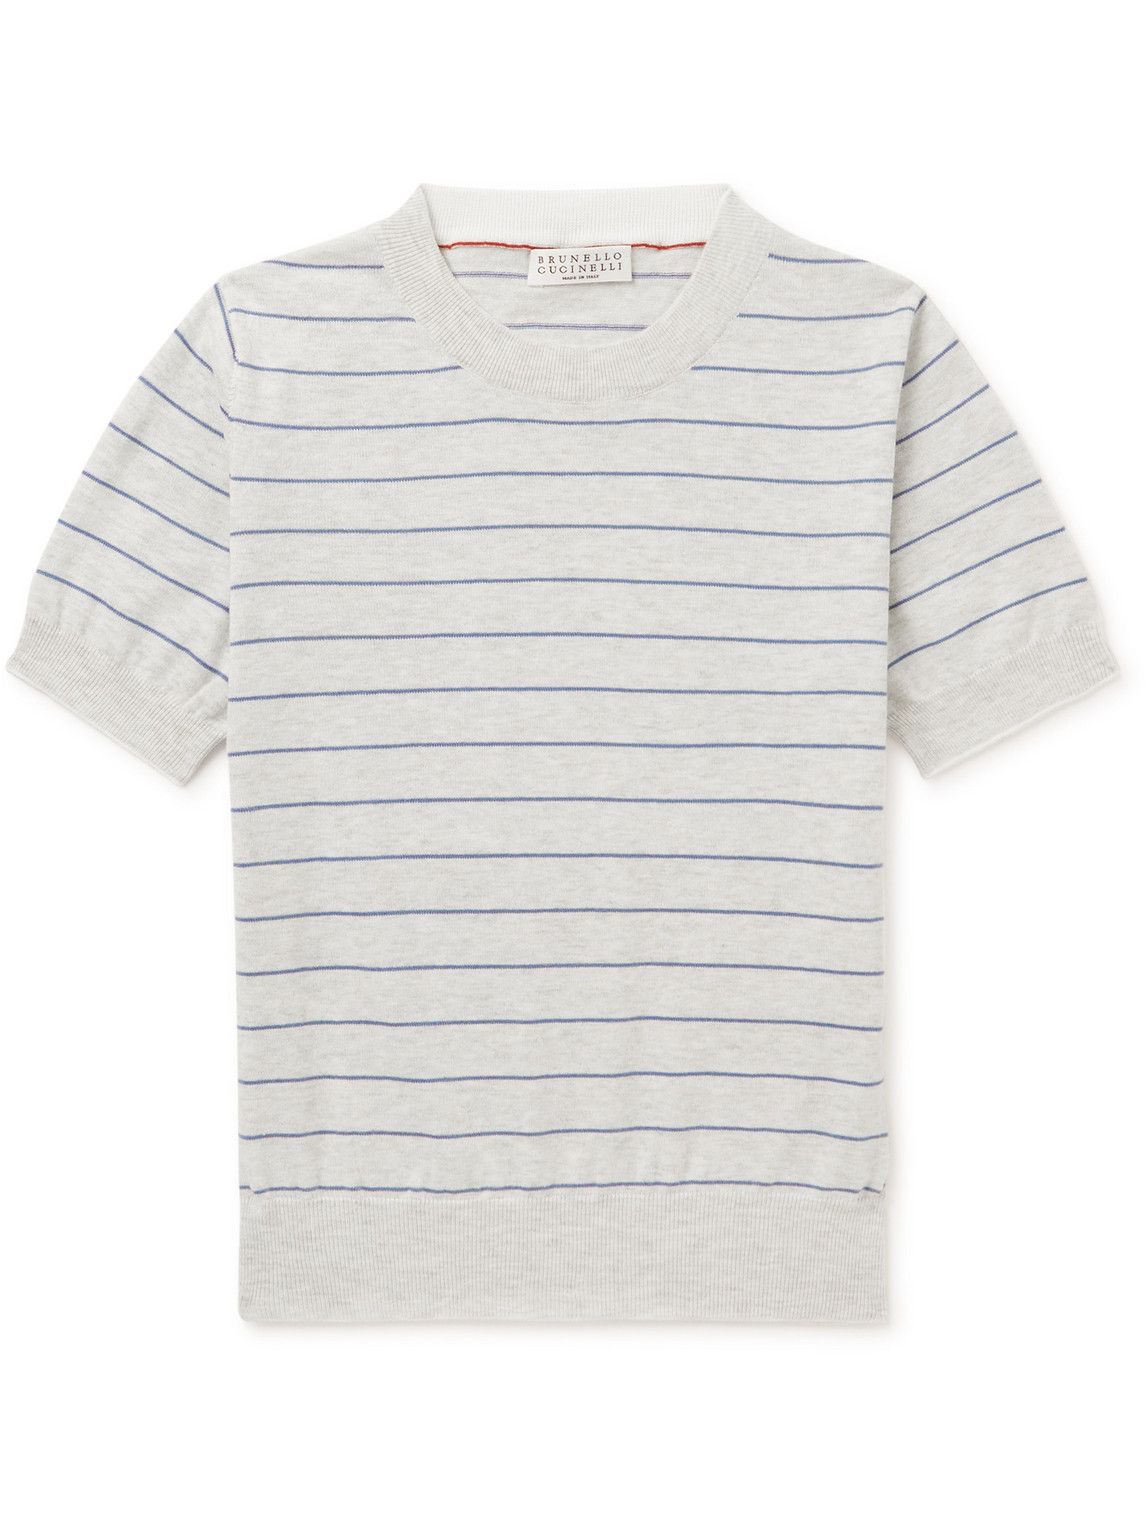 Ages 8-11 Striped Cotton-Jersey T-Shirt